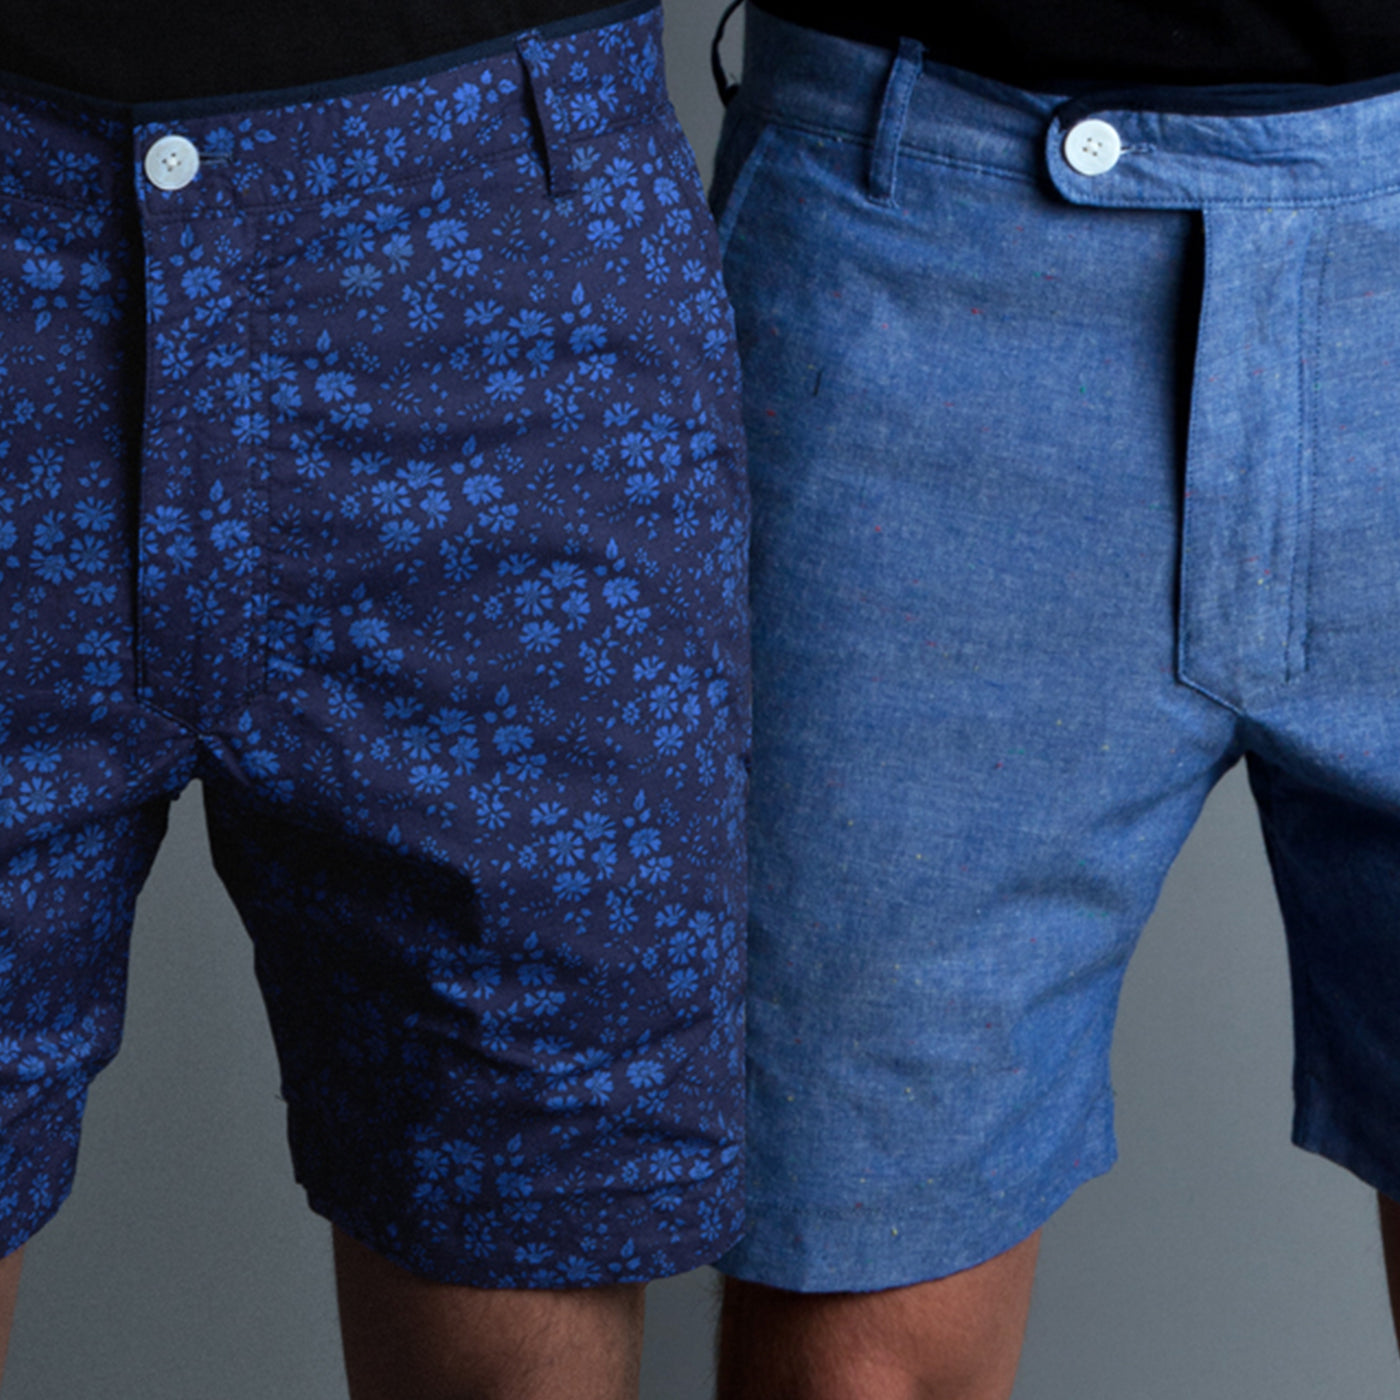 Reversible Shorts for 4 different guys